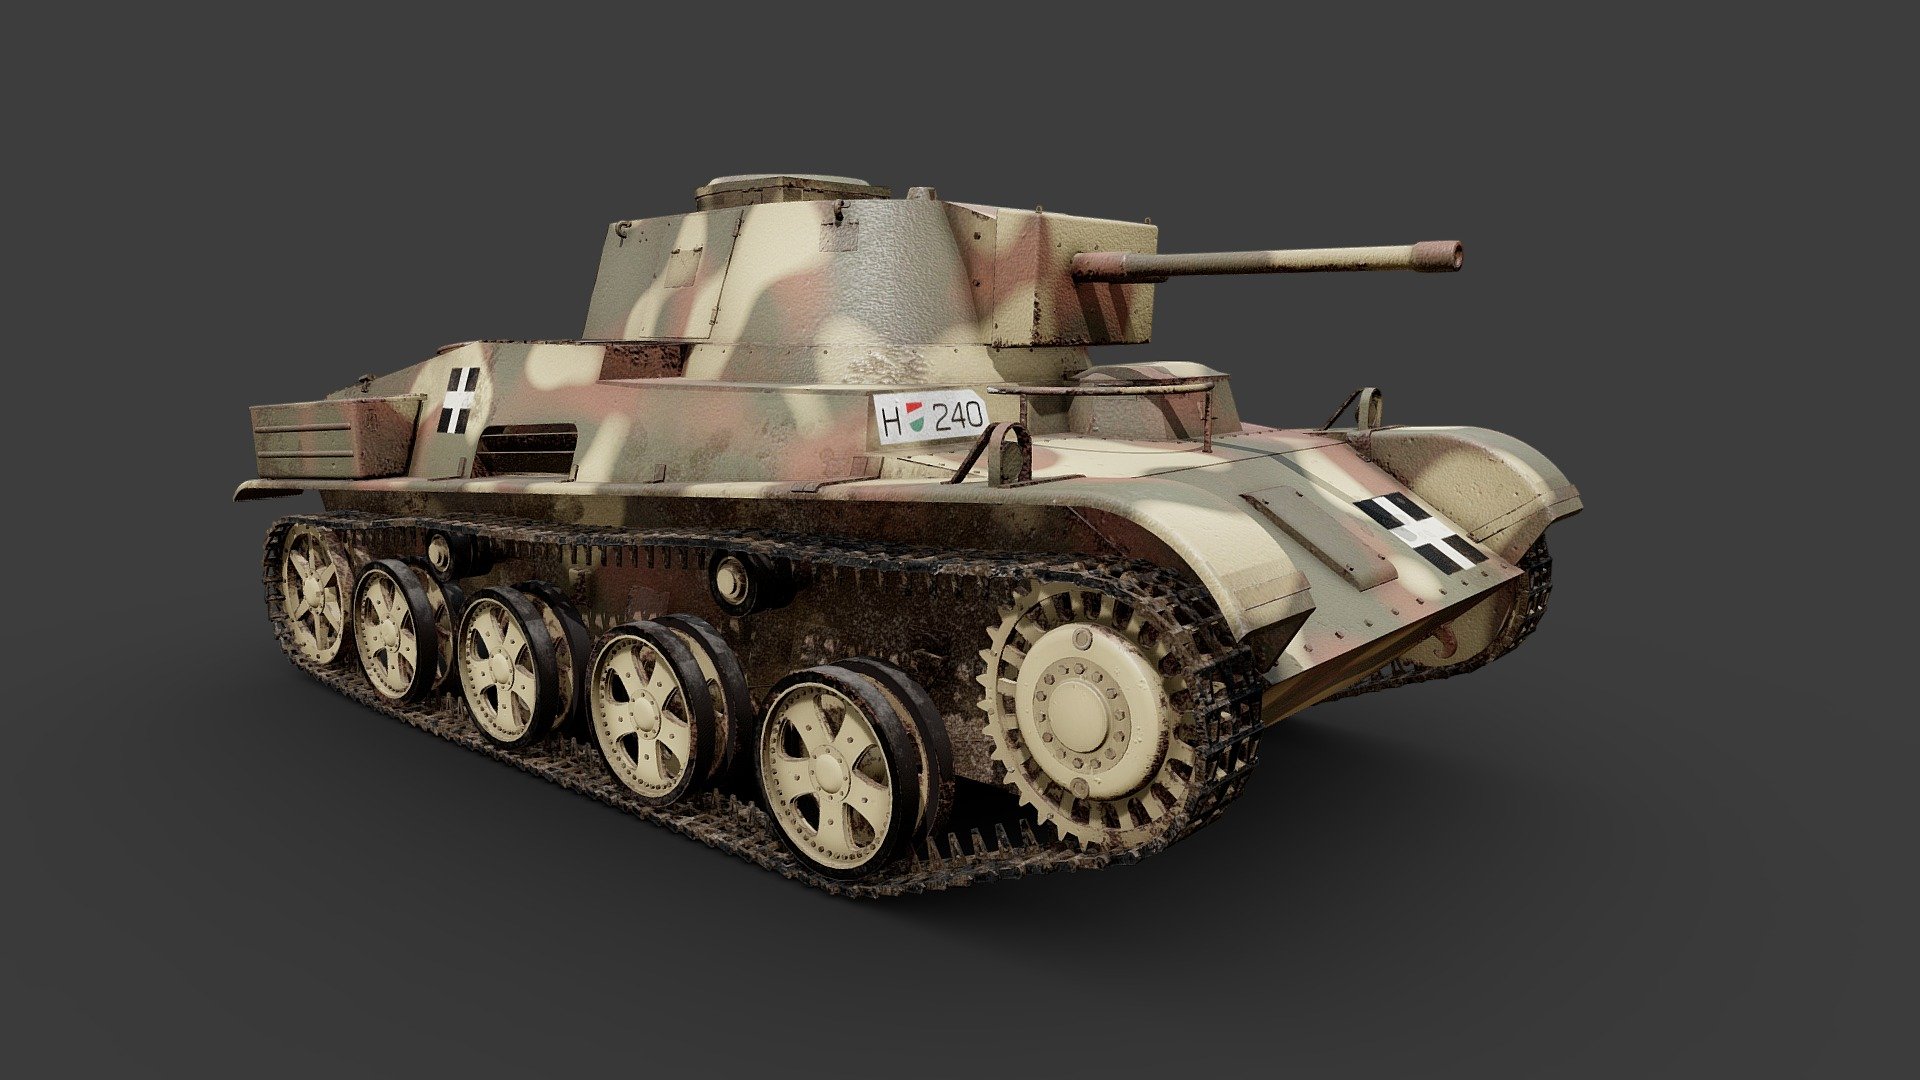 Modification of the 38M Toldi I light tank. The vehicle was named after the Hungarian knight Miklos Toldi. The tank featured improved armor and increased ammunition capacity compared to previous versions. Approximately 12 vehicles were manufactured during WWII 3d model